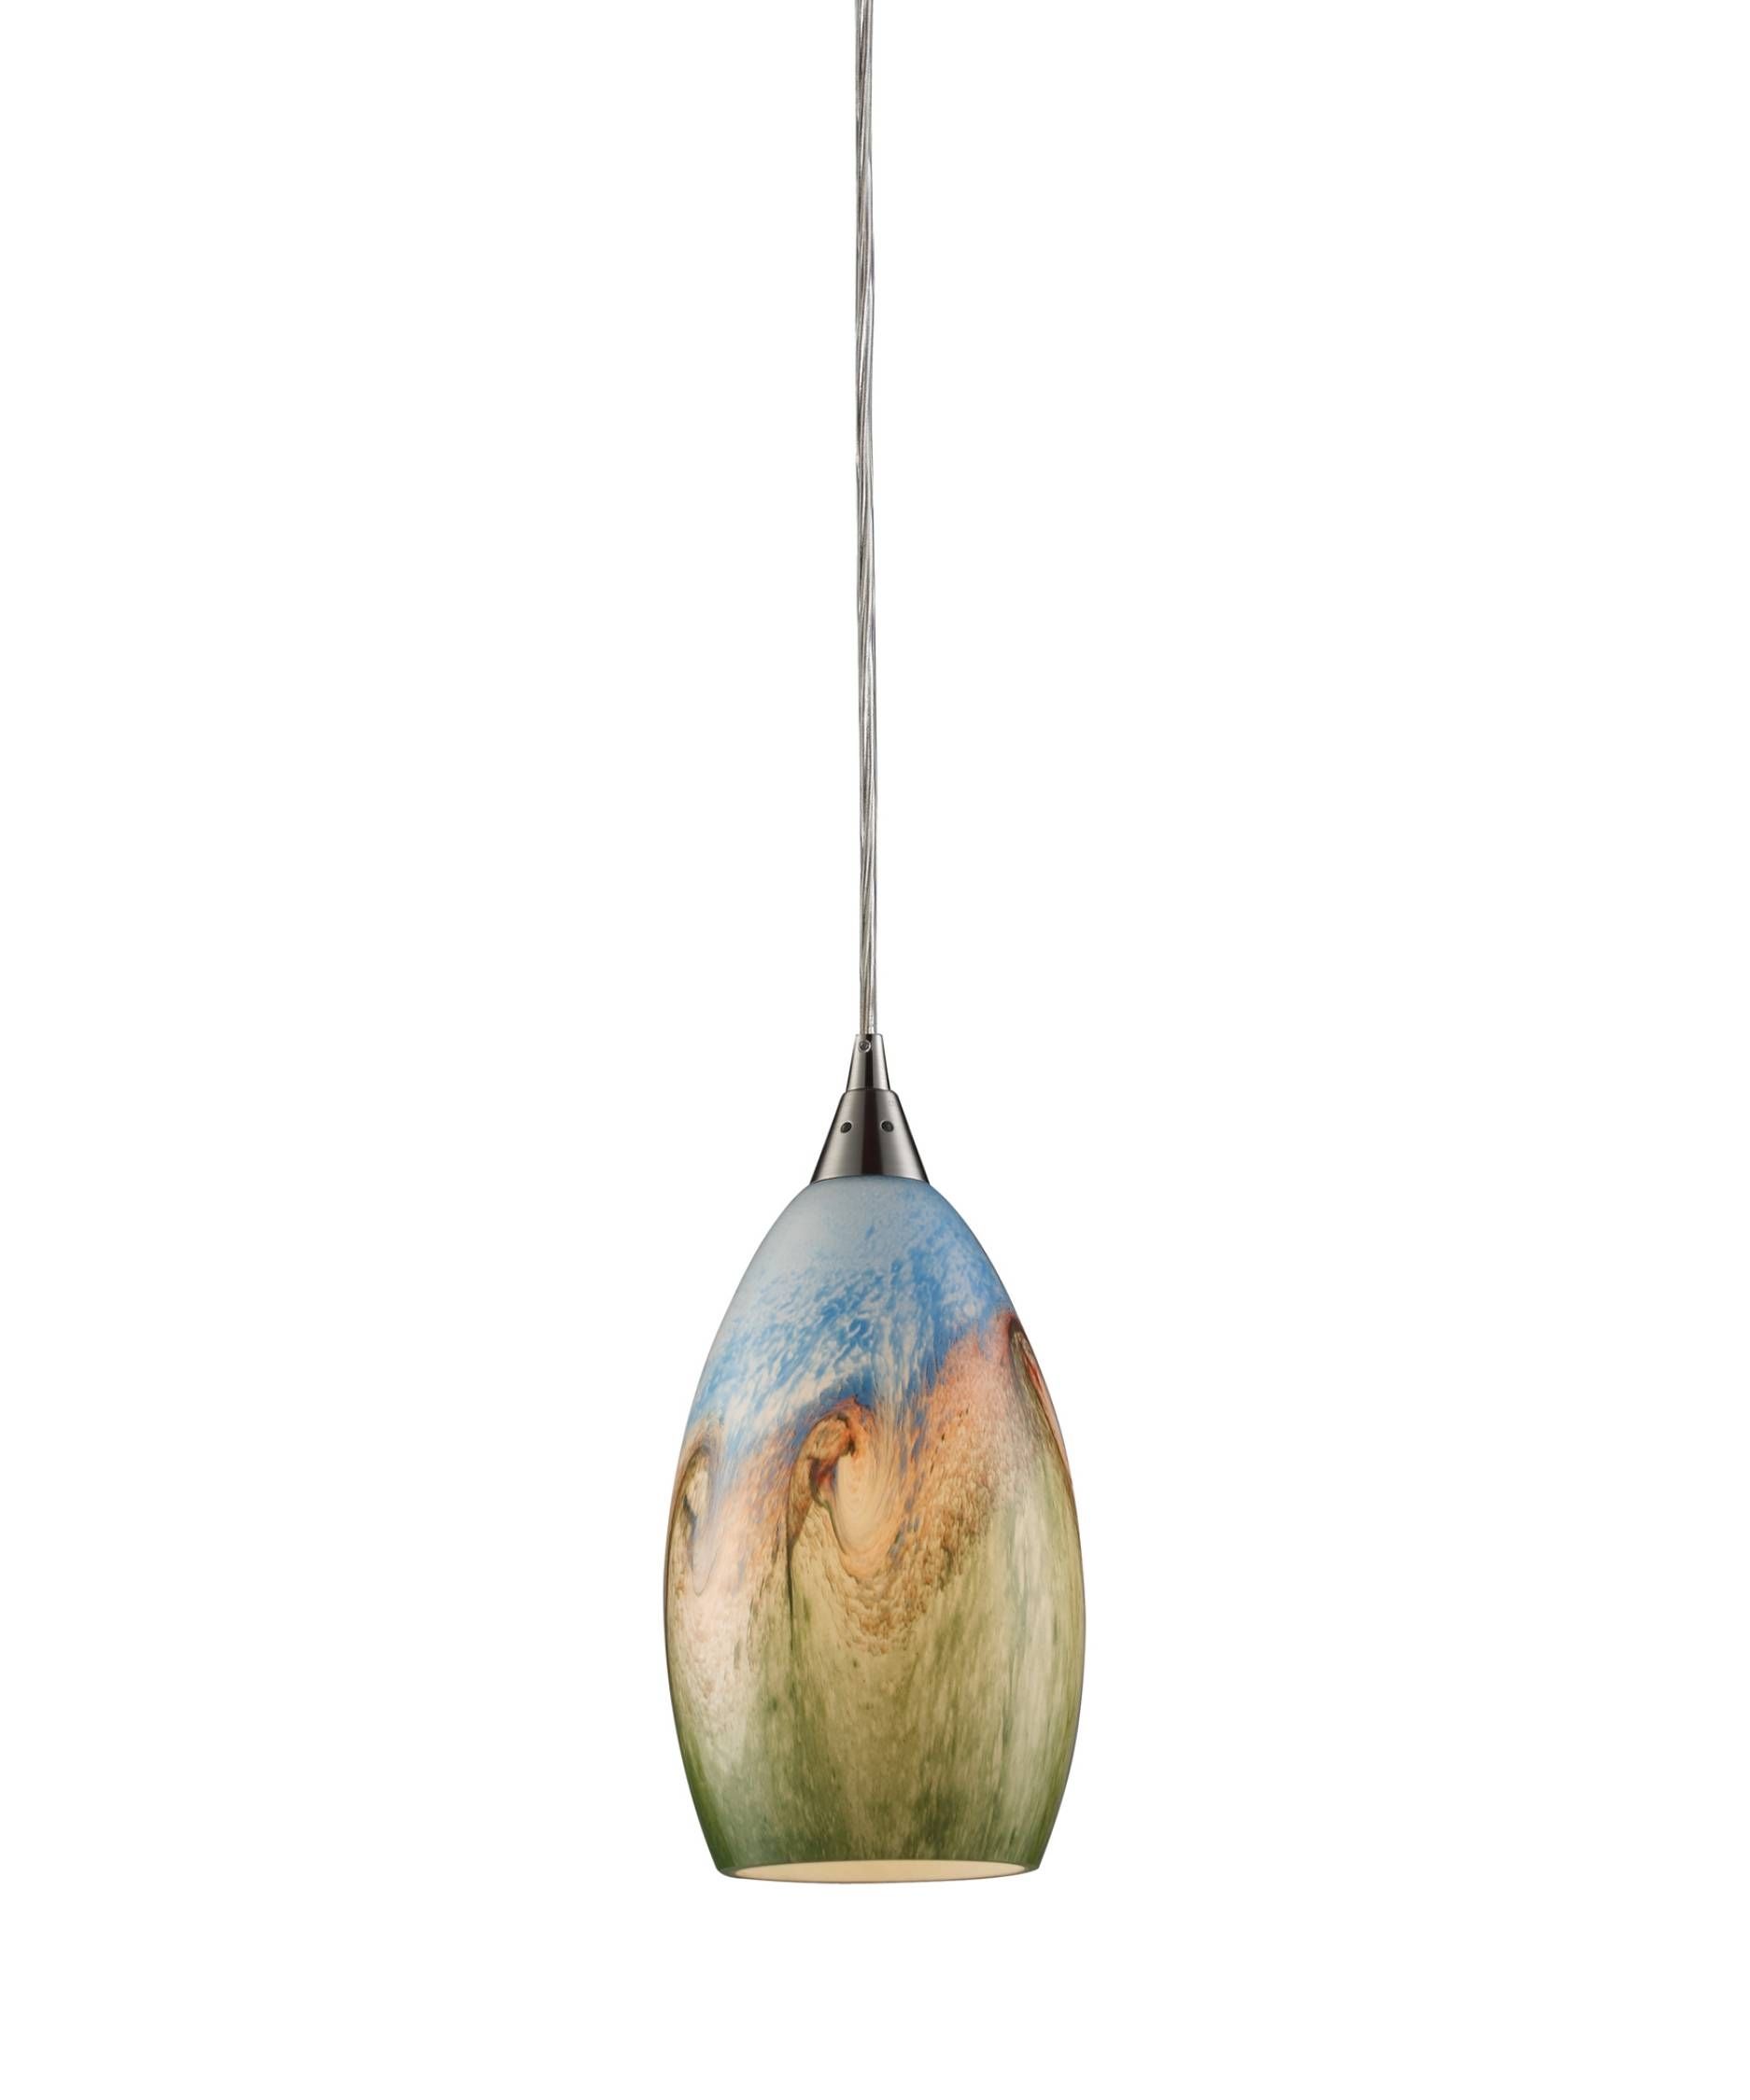 Great Murano Glass Pendant Lights 16 In Remote Control Ceiling Regarding Murano Glass Lights Pendants (View 6 of 15)